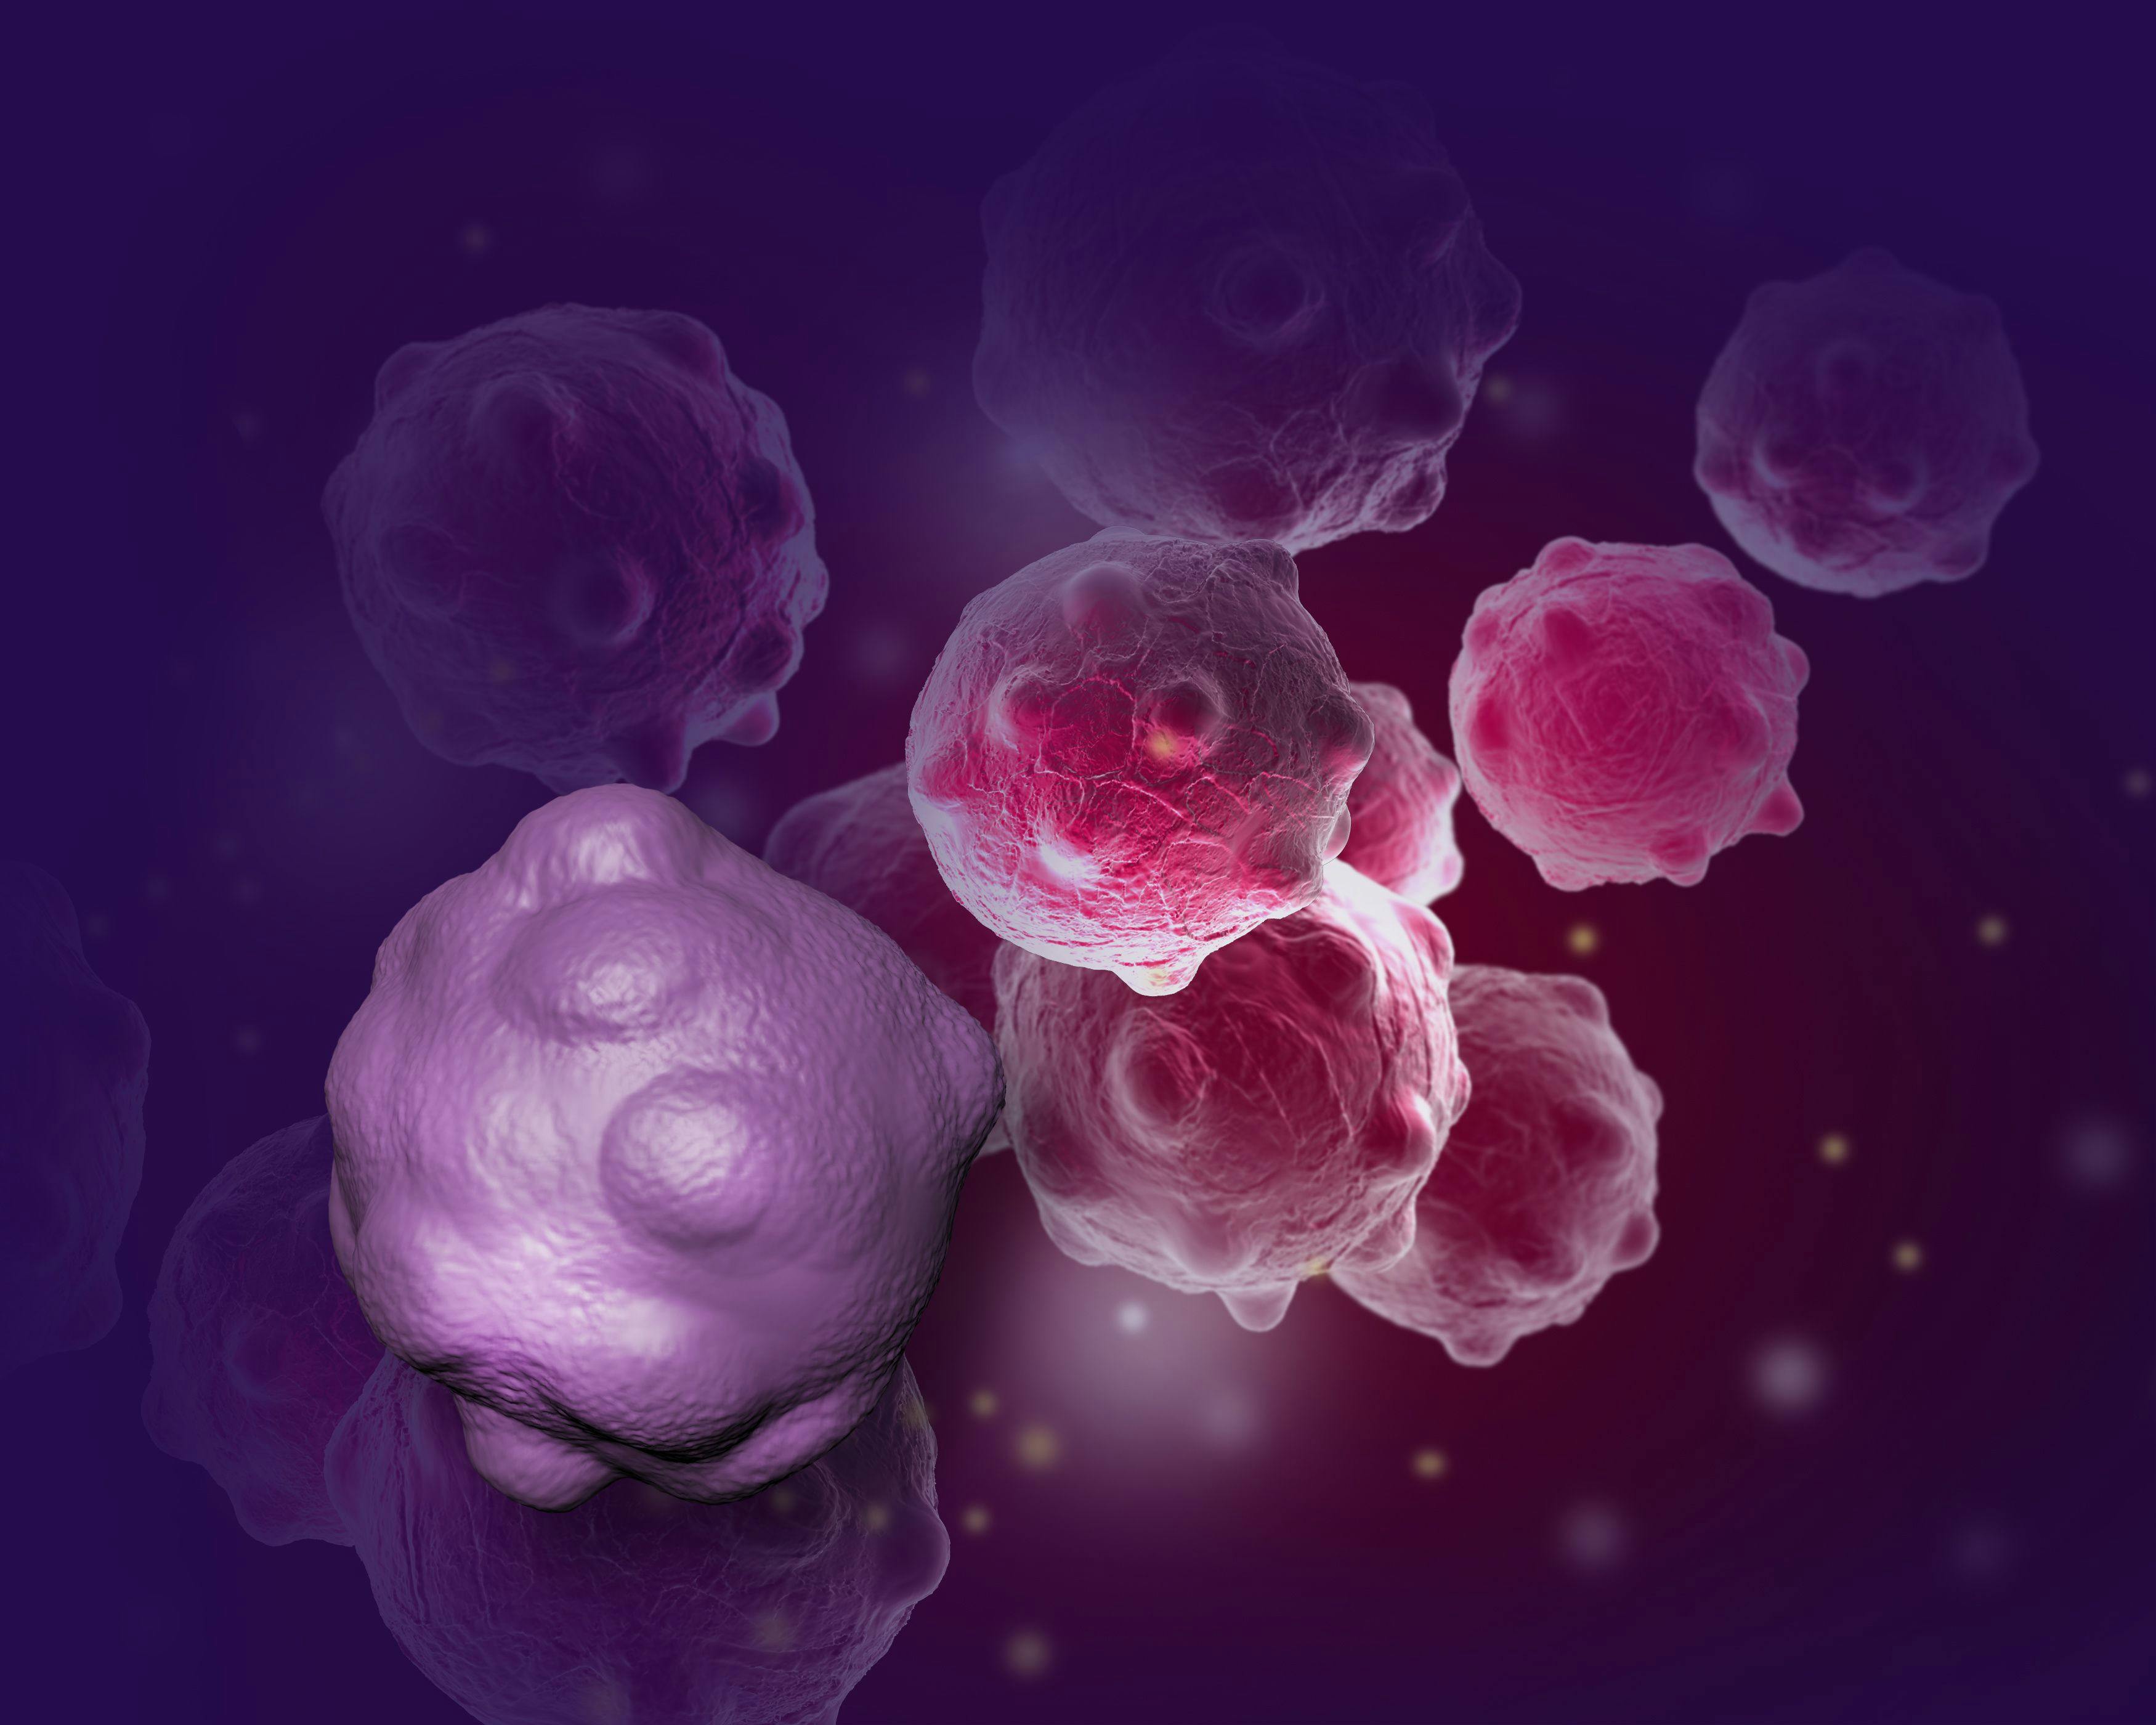 Umbralisib Activity, Safety in Indolent Lymphomas Demonstrated in Phase 2b Trial 